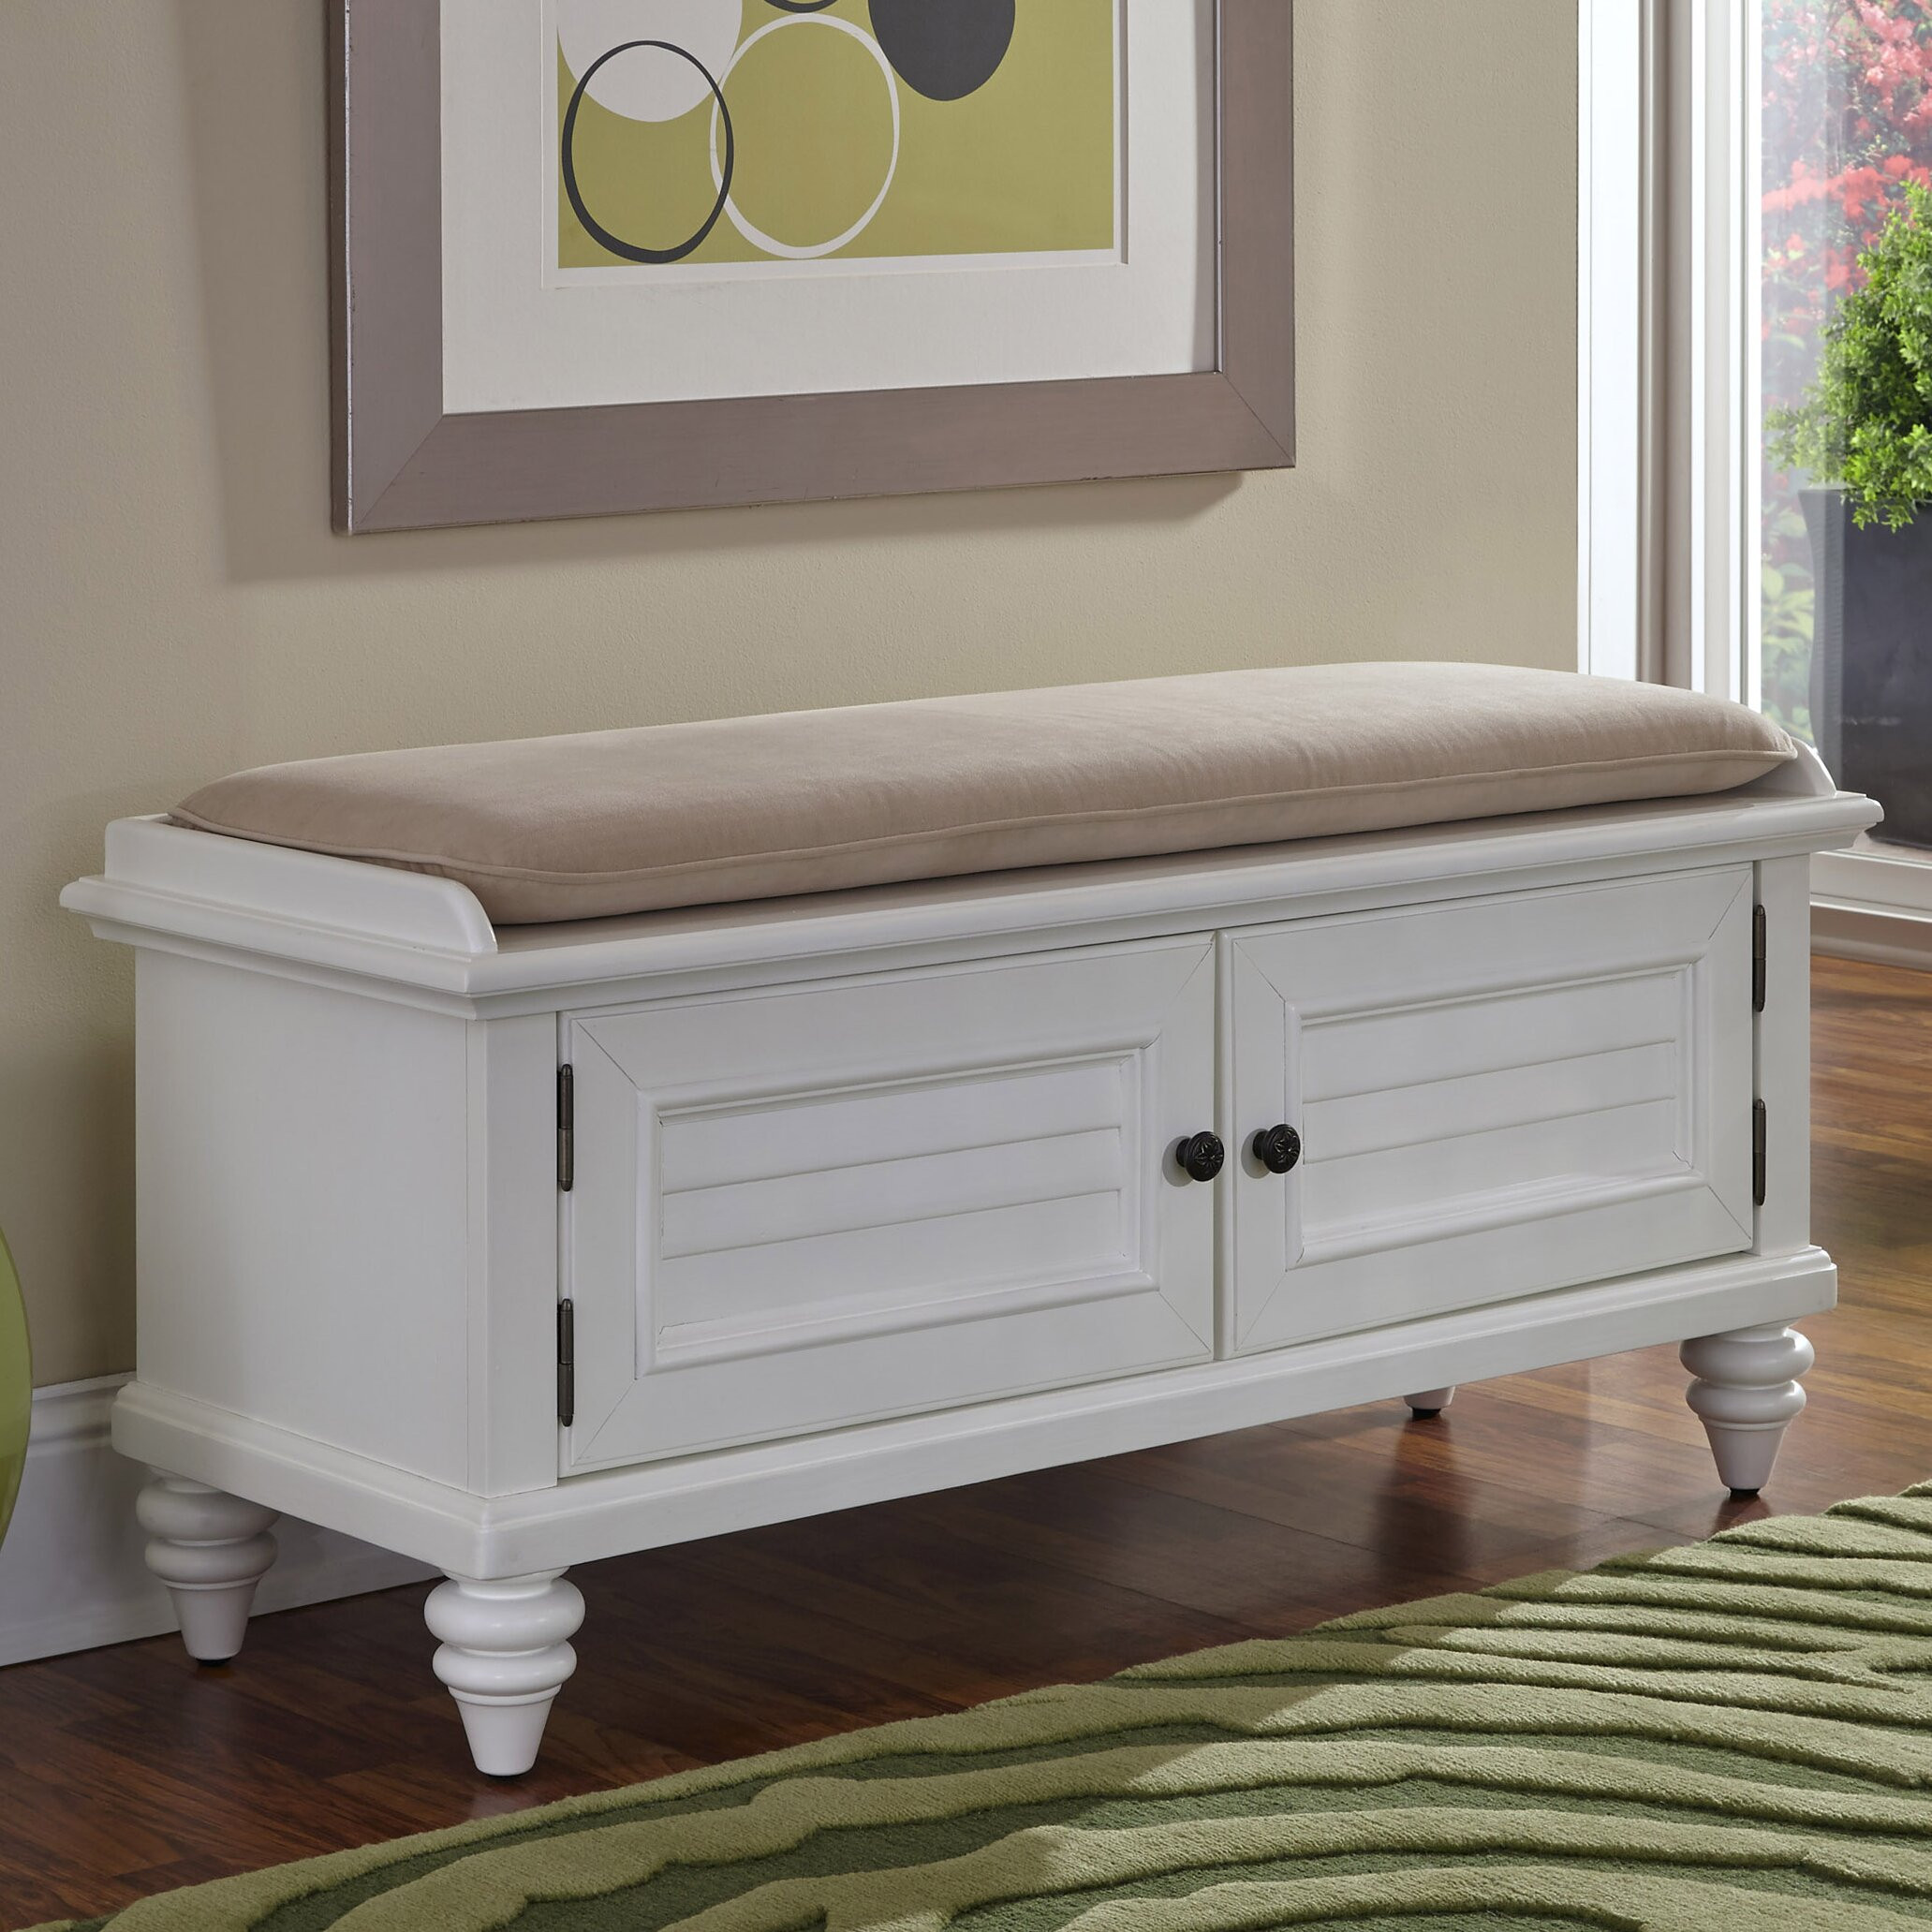 Bench For Entryway With Storage
 Breakwater Bay Kenduskeag Upholstered Storage Entryway